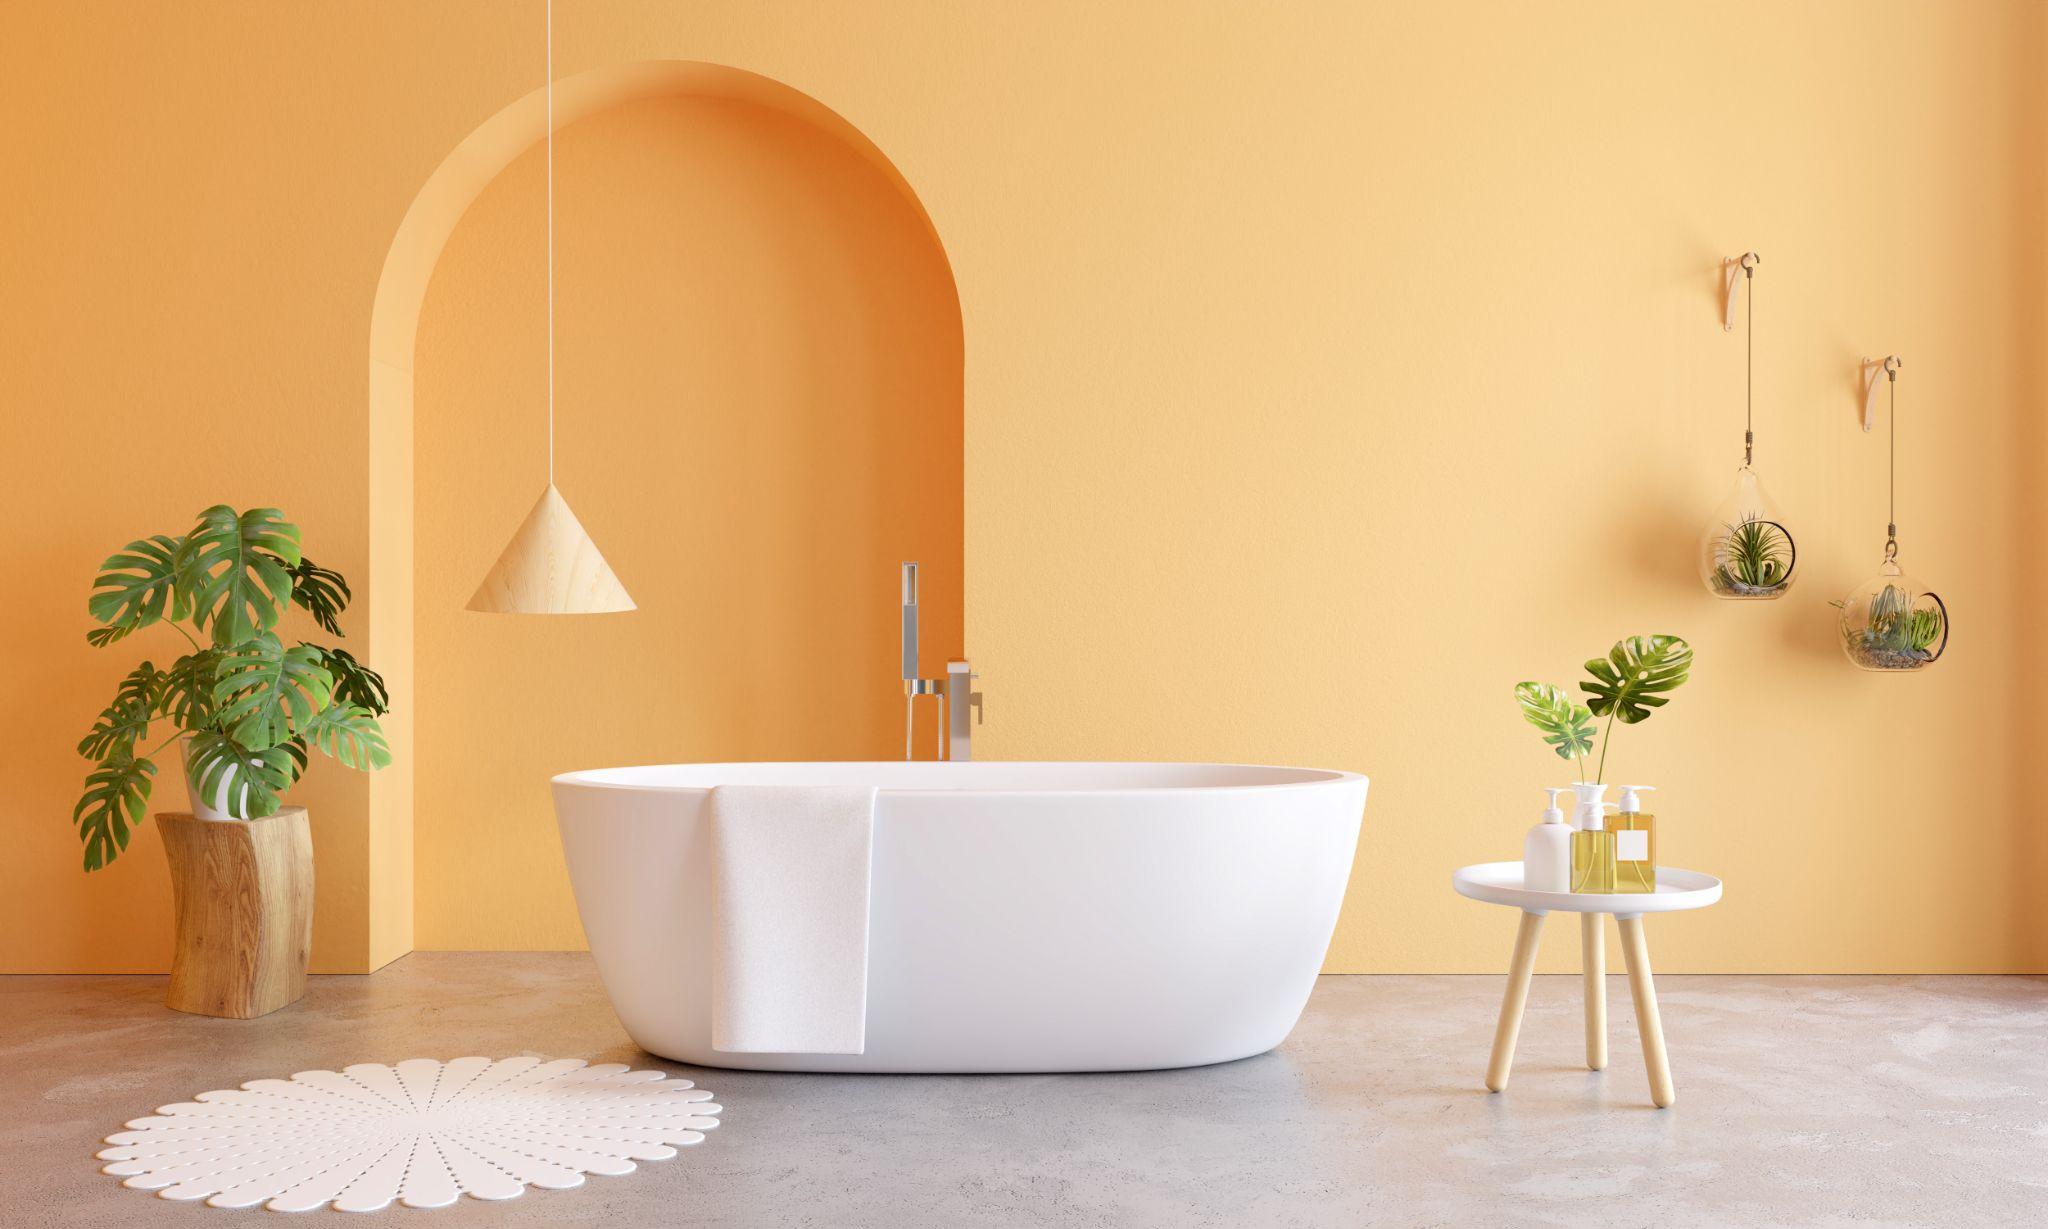 Bright bathroom ideas – turn a simple room into an elegant and relaxing space using light and colour, 2, eurocraftswfl.com